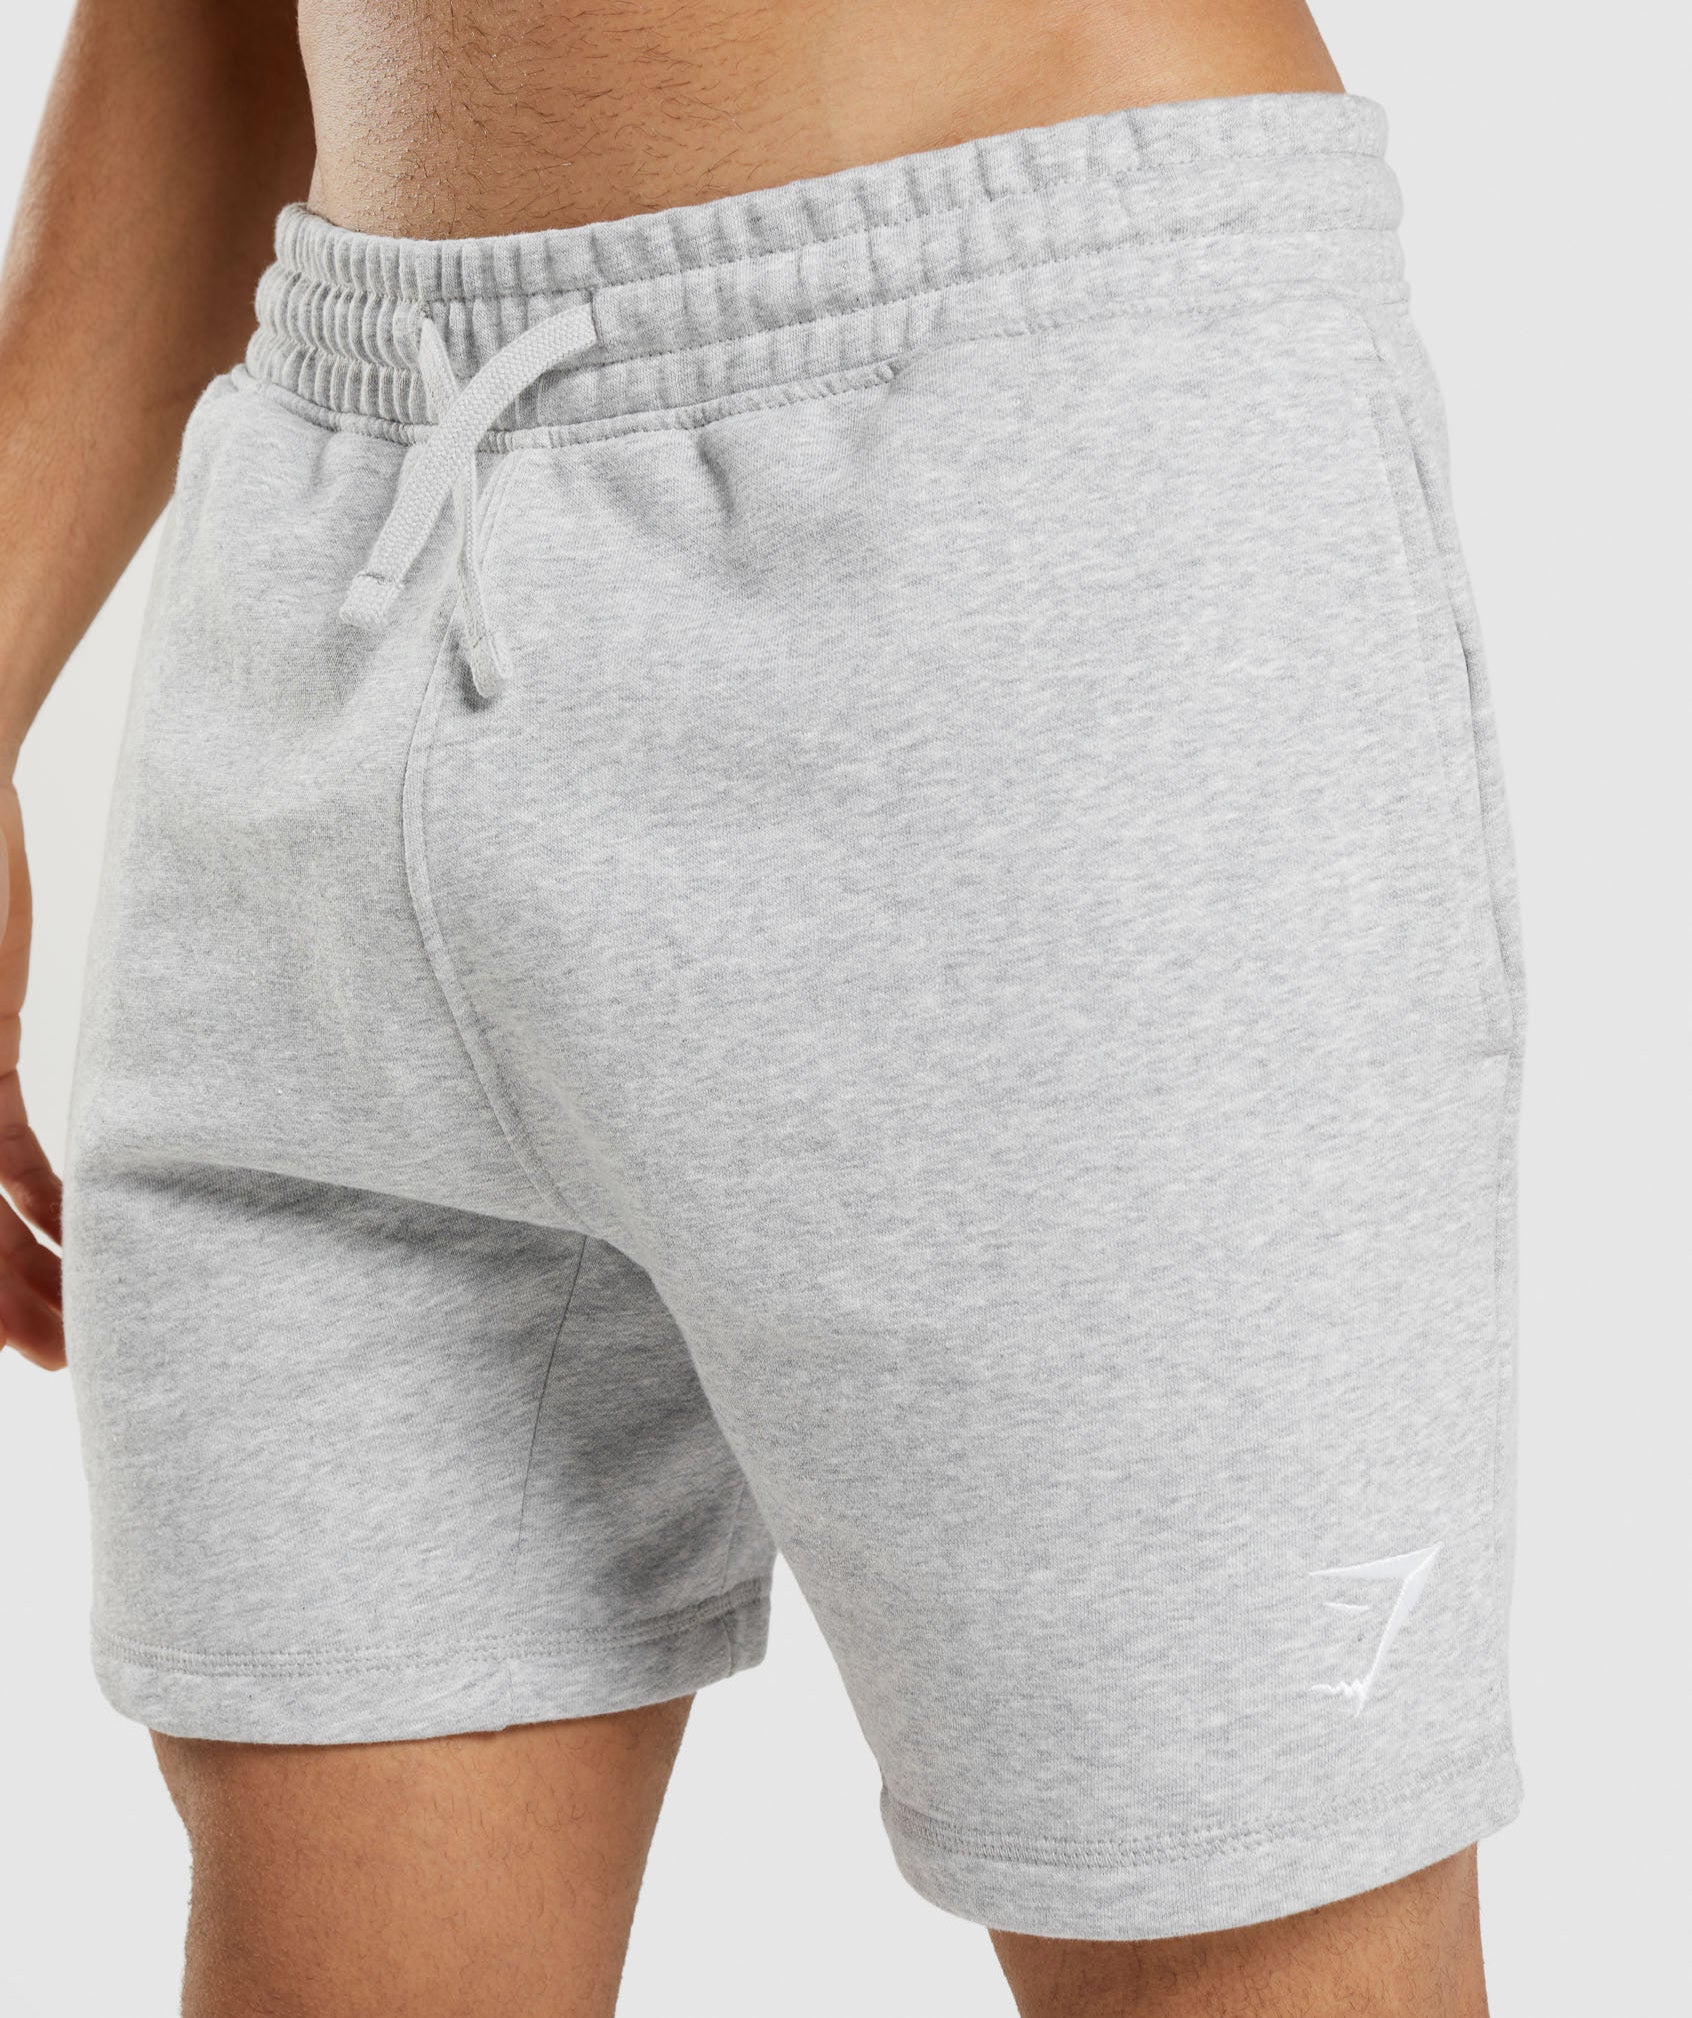 Crest Shorts in Light Grey Marl - view 6